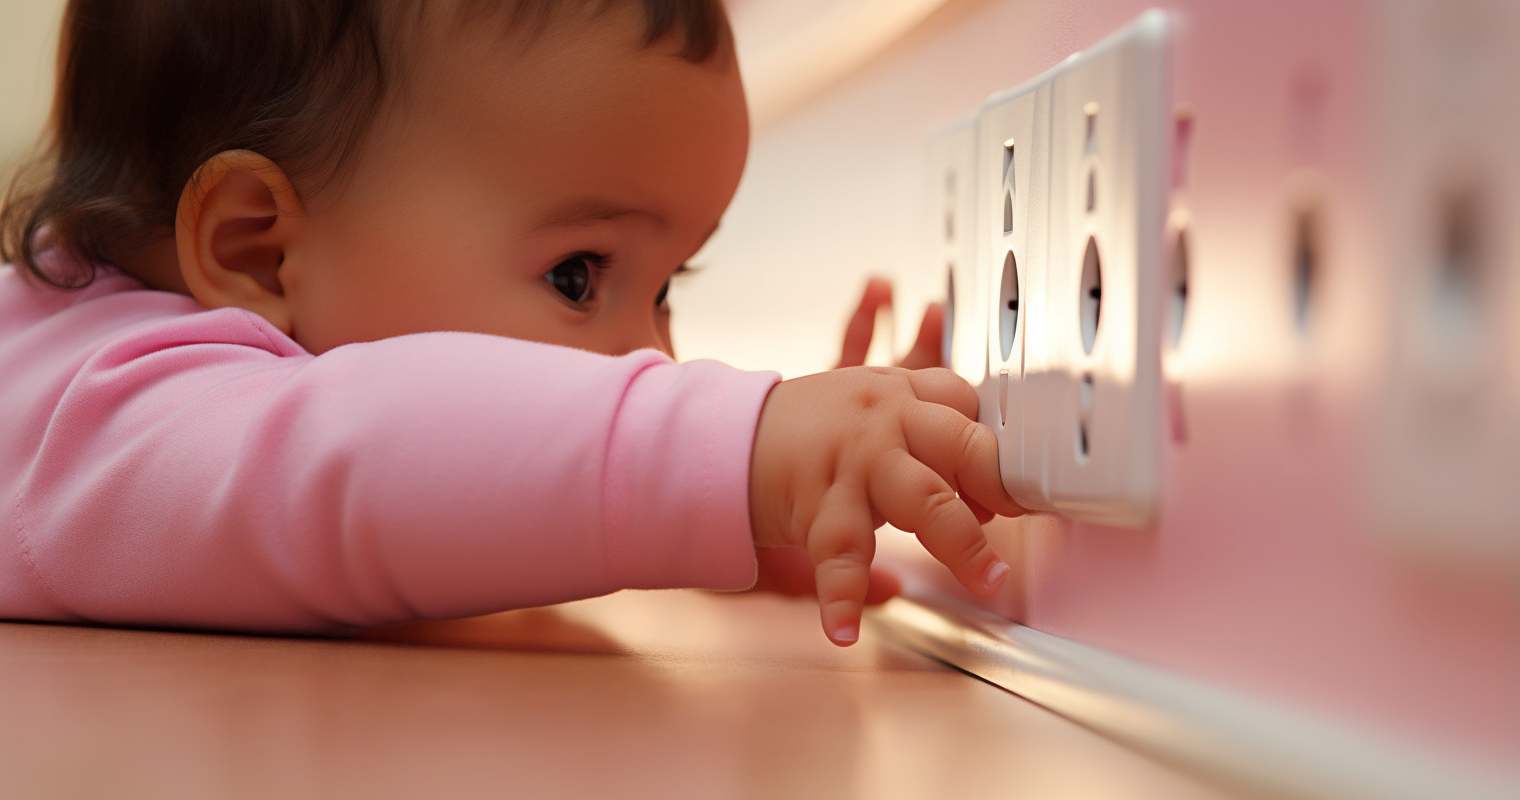 Childproofing Outlets and Cords